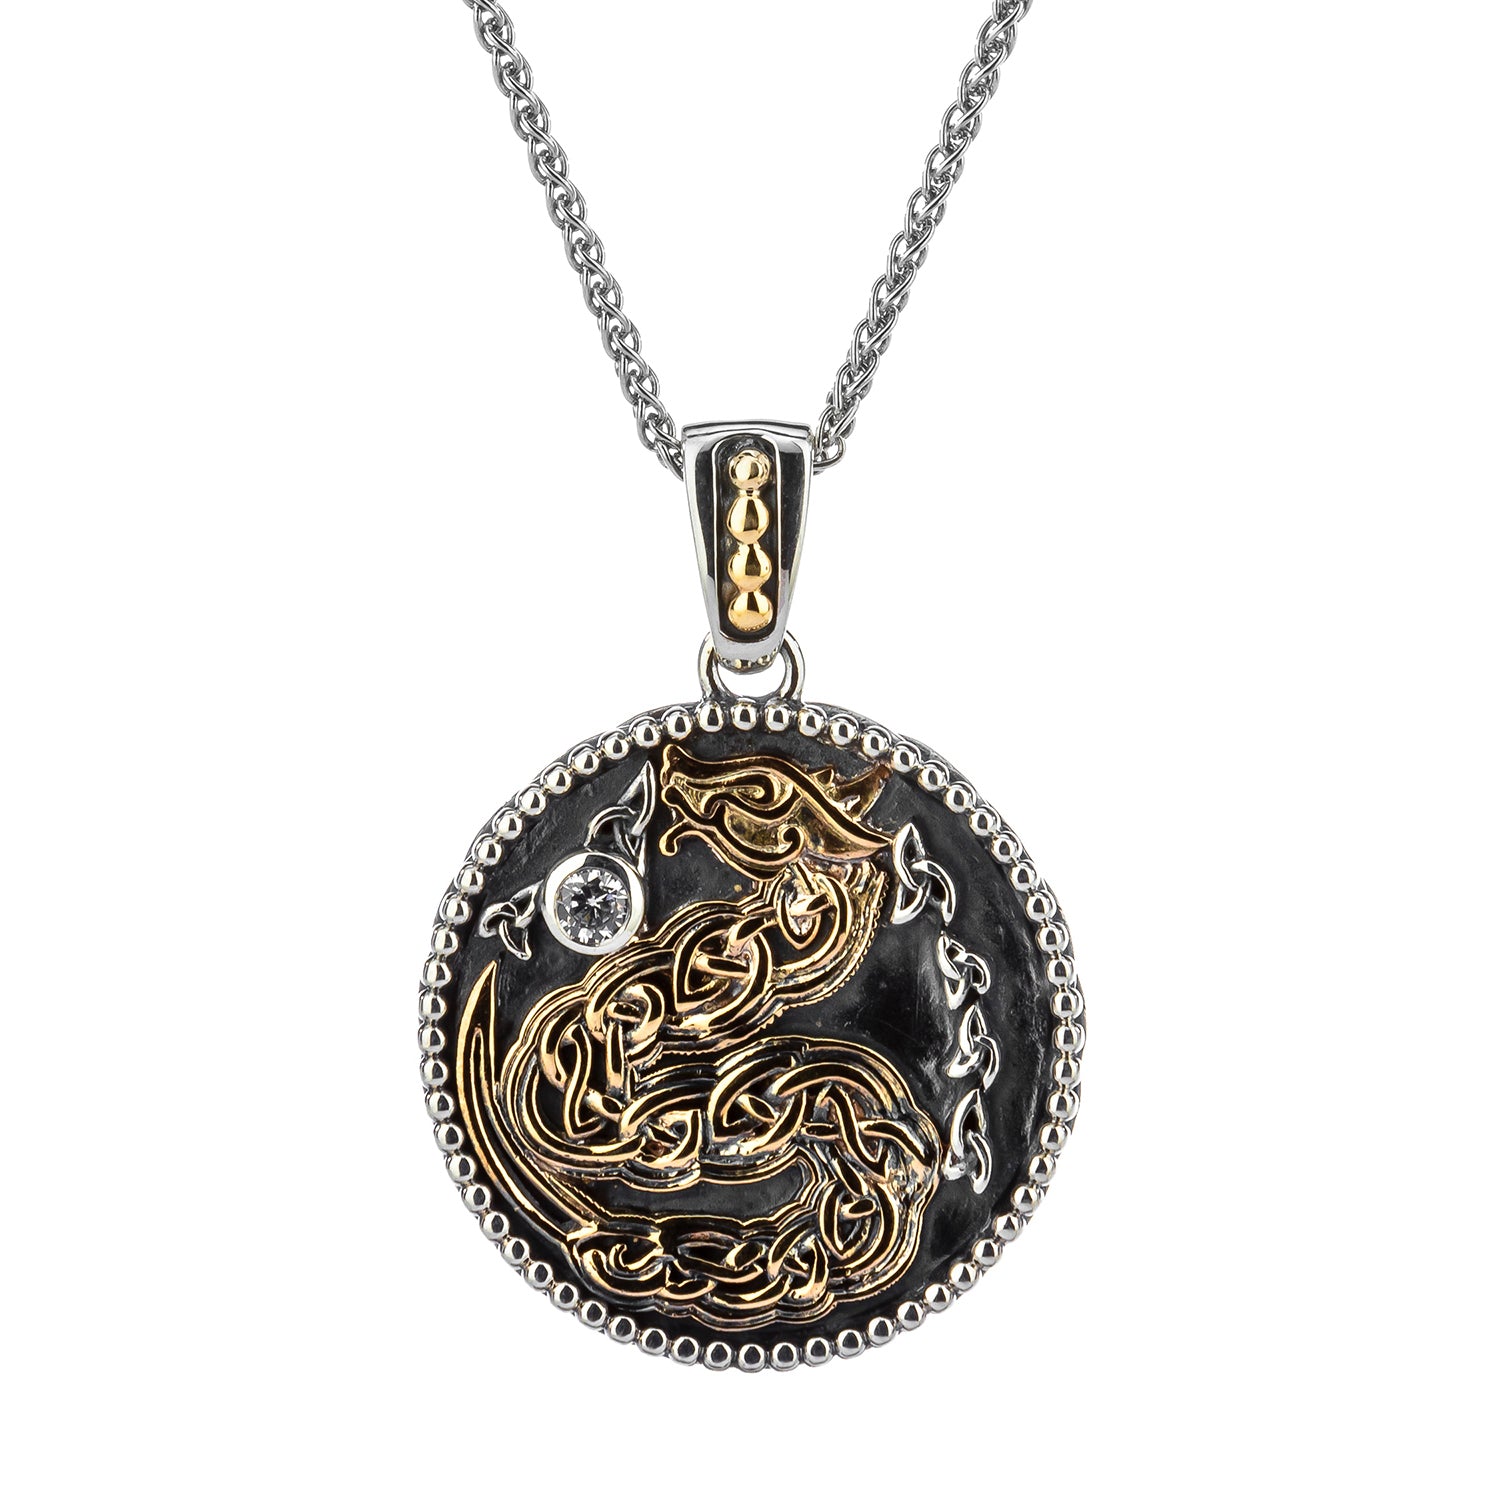 Pendant Oxidized 10k CZ Medallion Reversible Dragon Pendant from welch and company jewelers near syracuse ny 